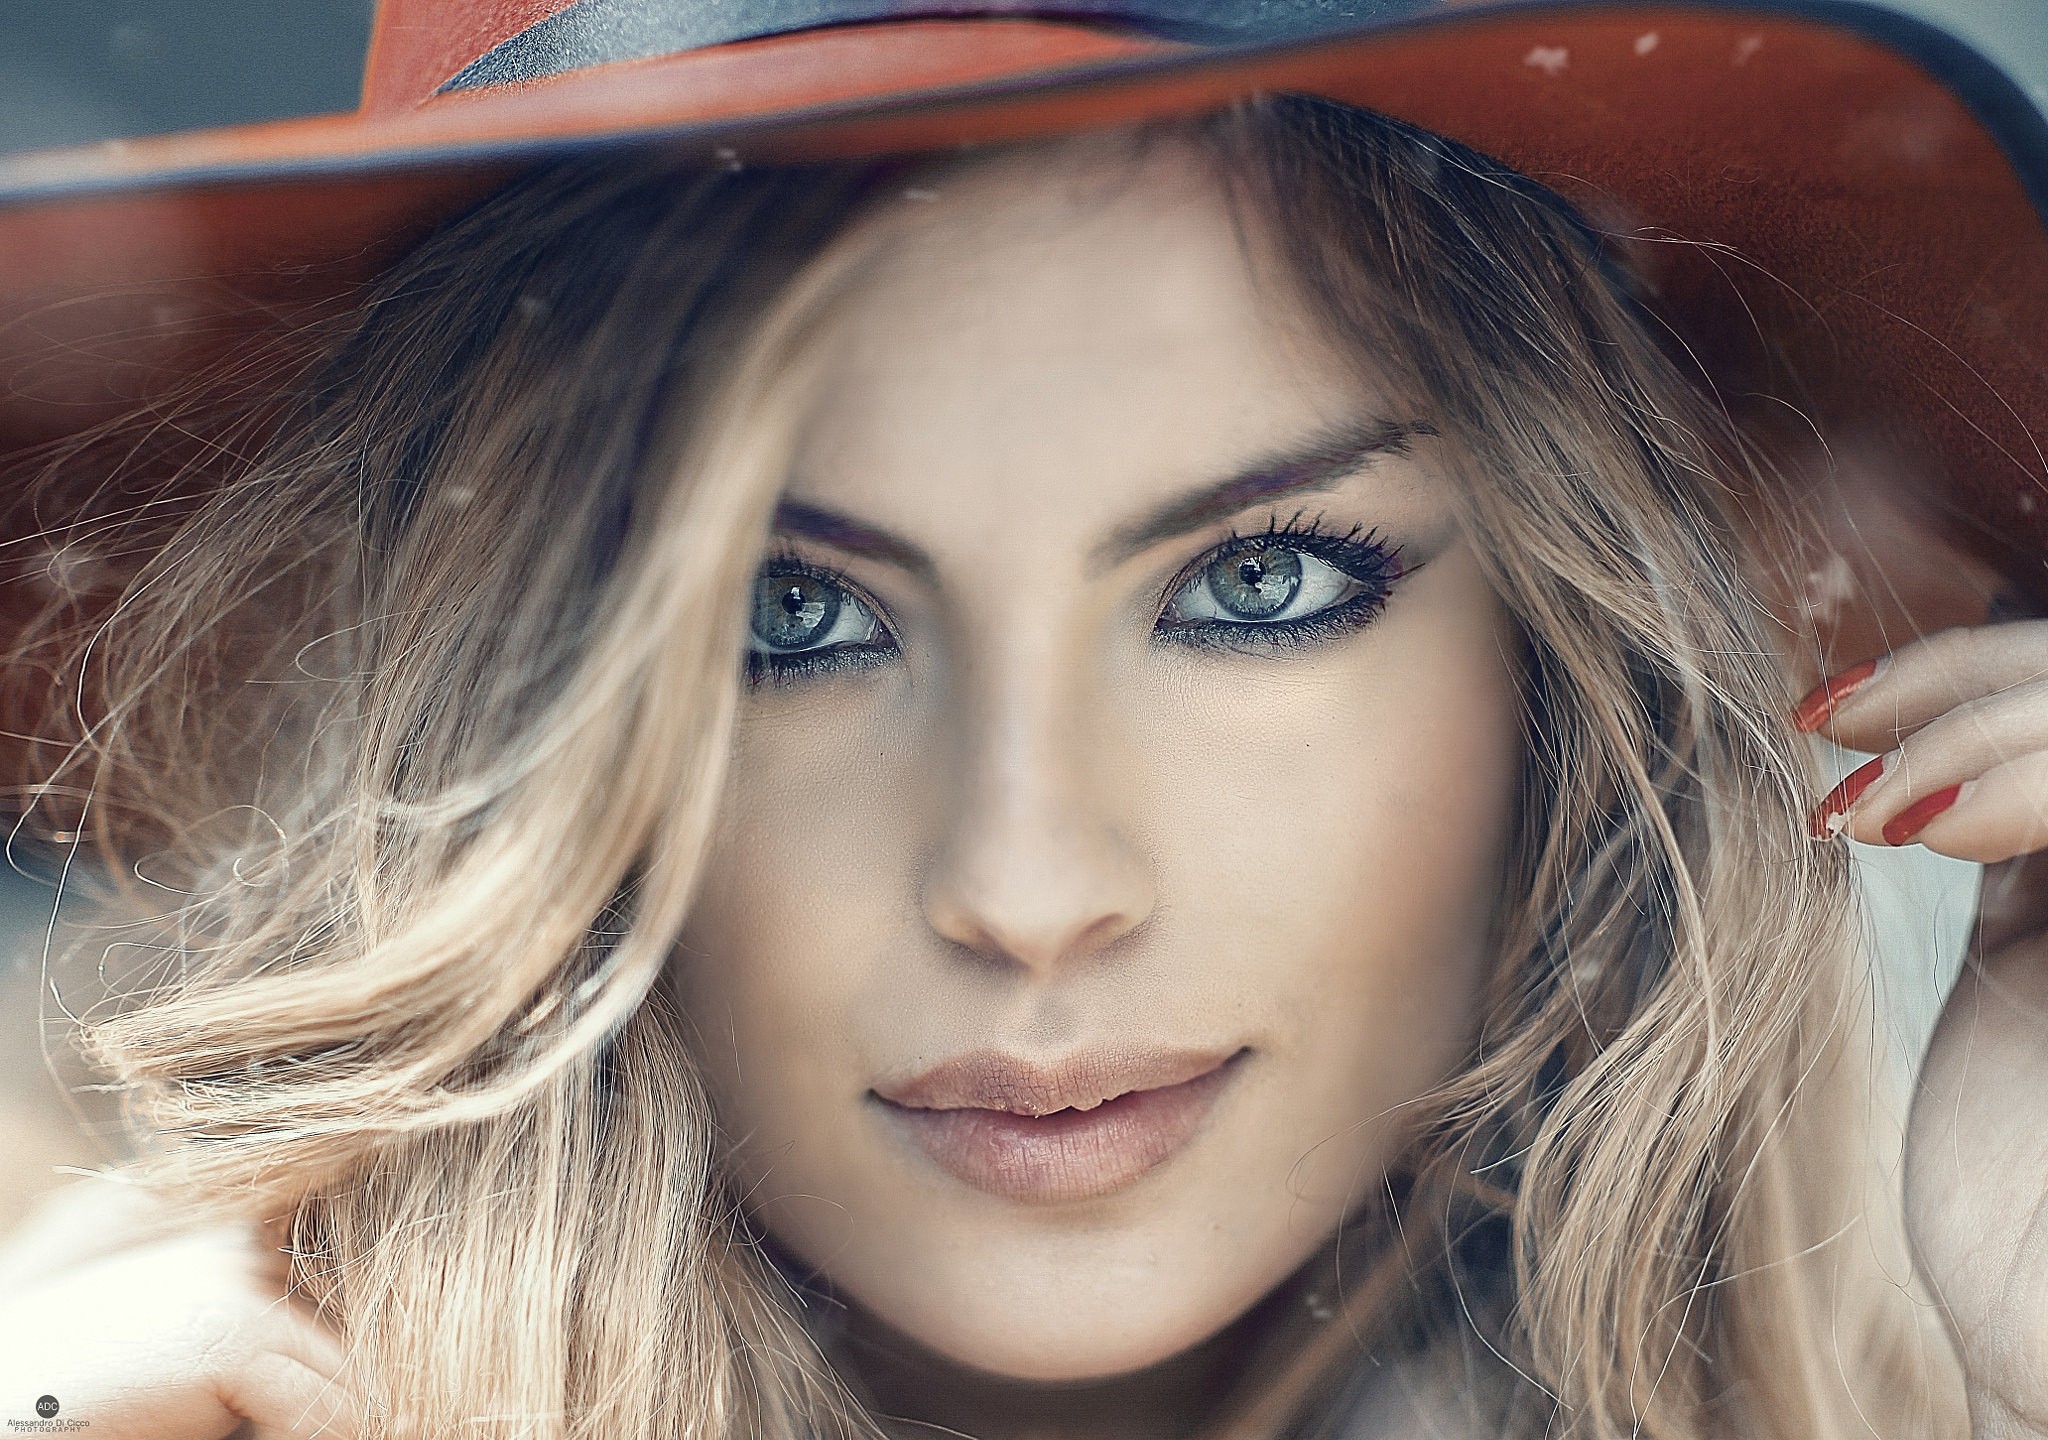 People 2048x1440 women face portrait blonde hat Alessandro Di Cicco closeup makeup women with hats red nails painted nails looking at viewer dyed hair